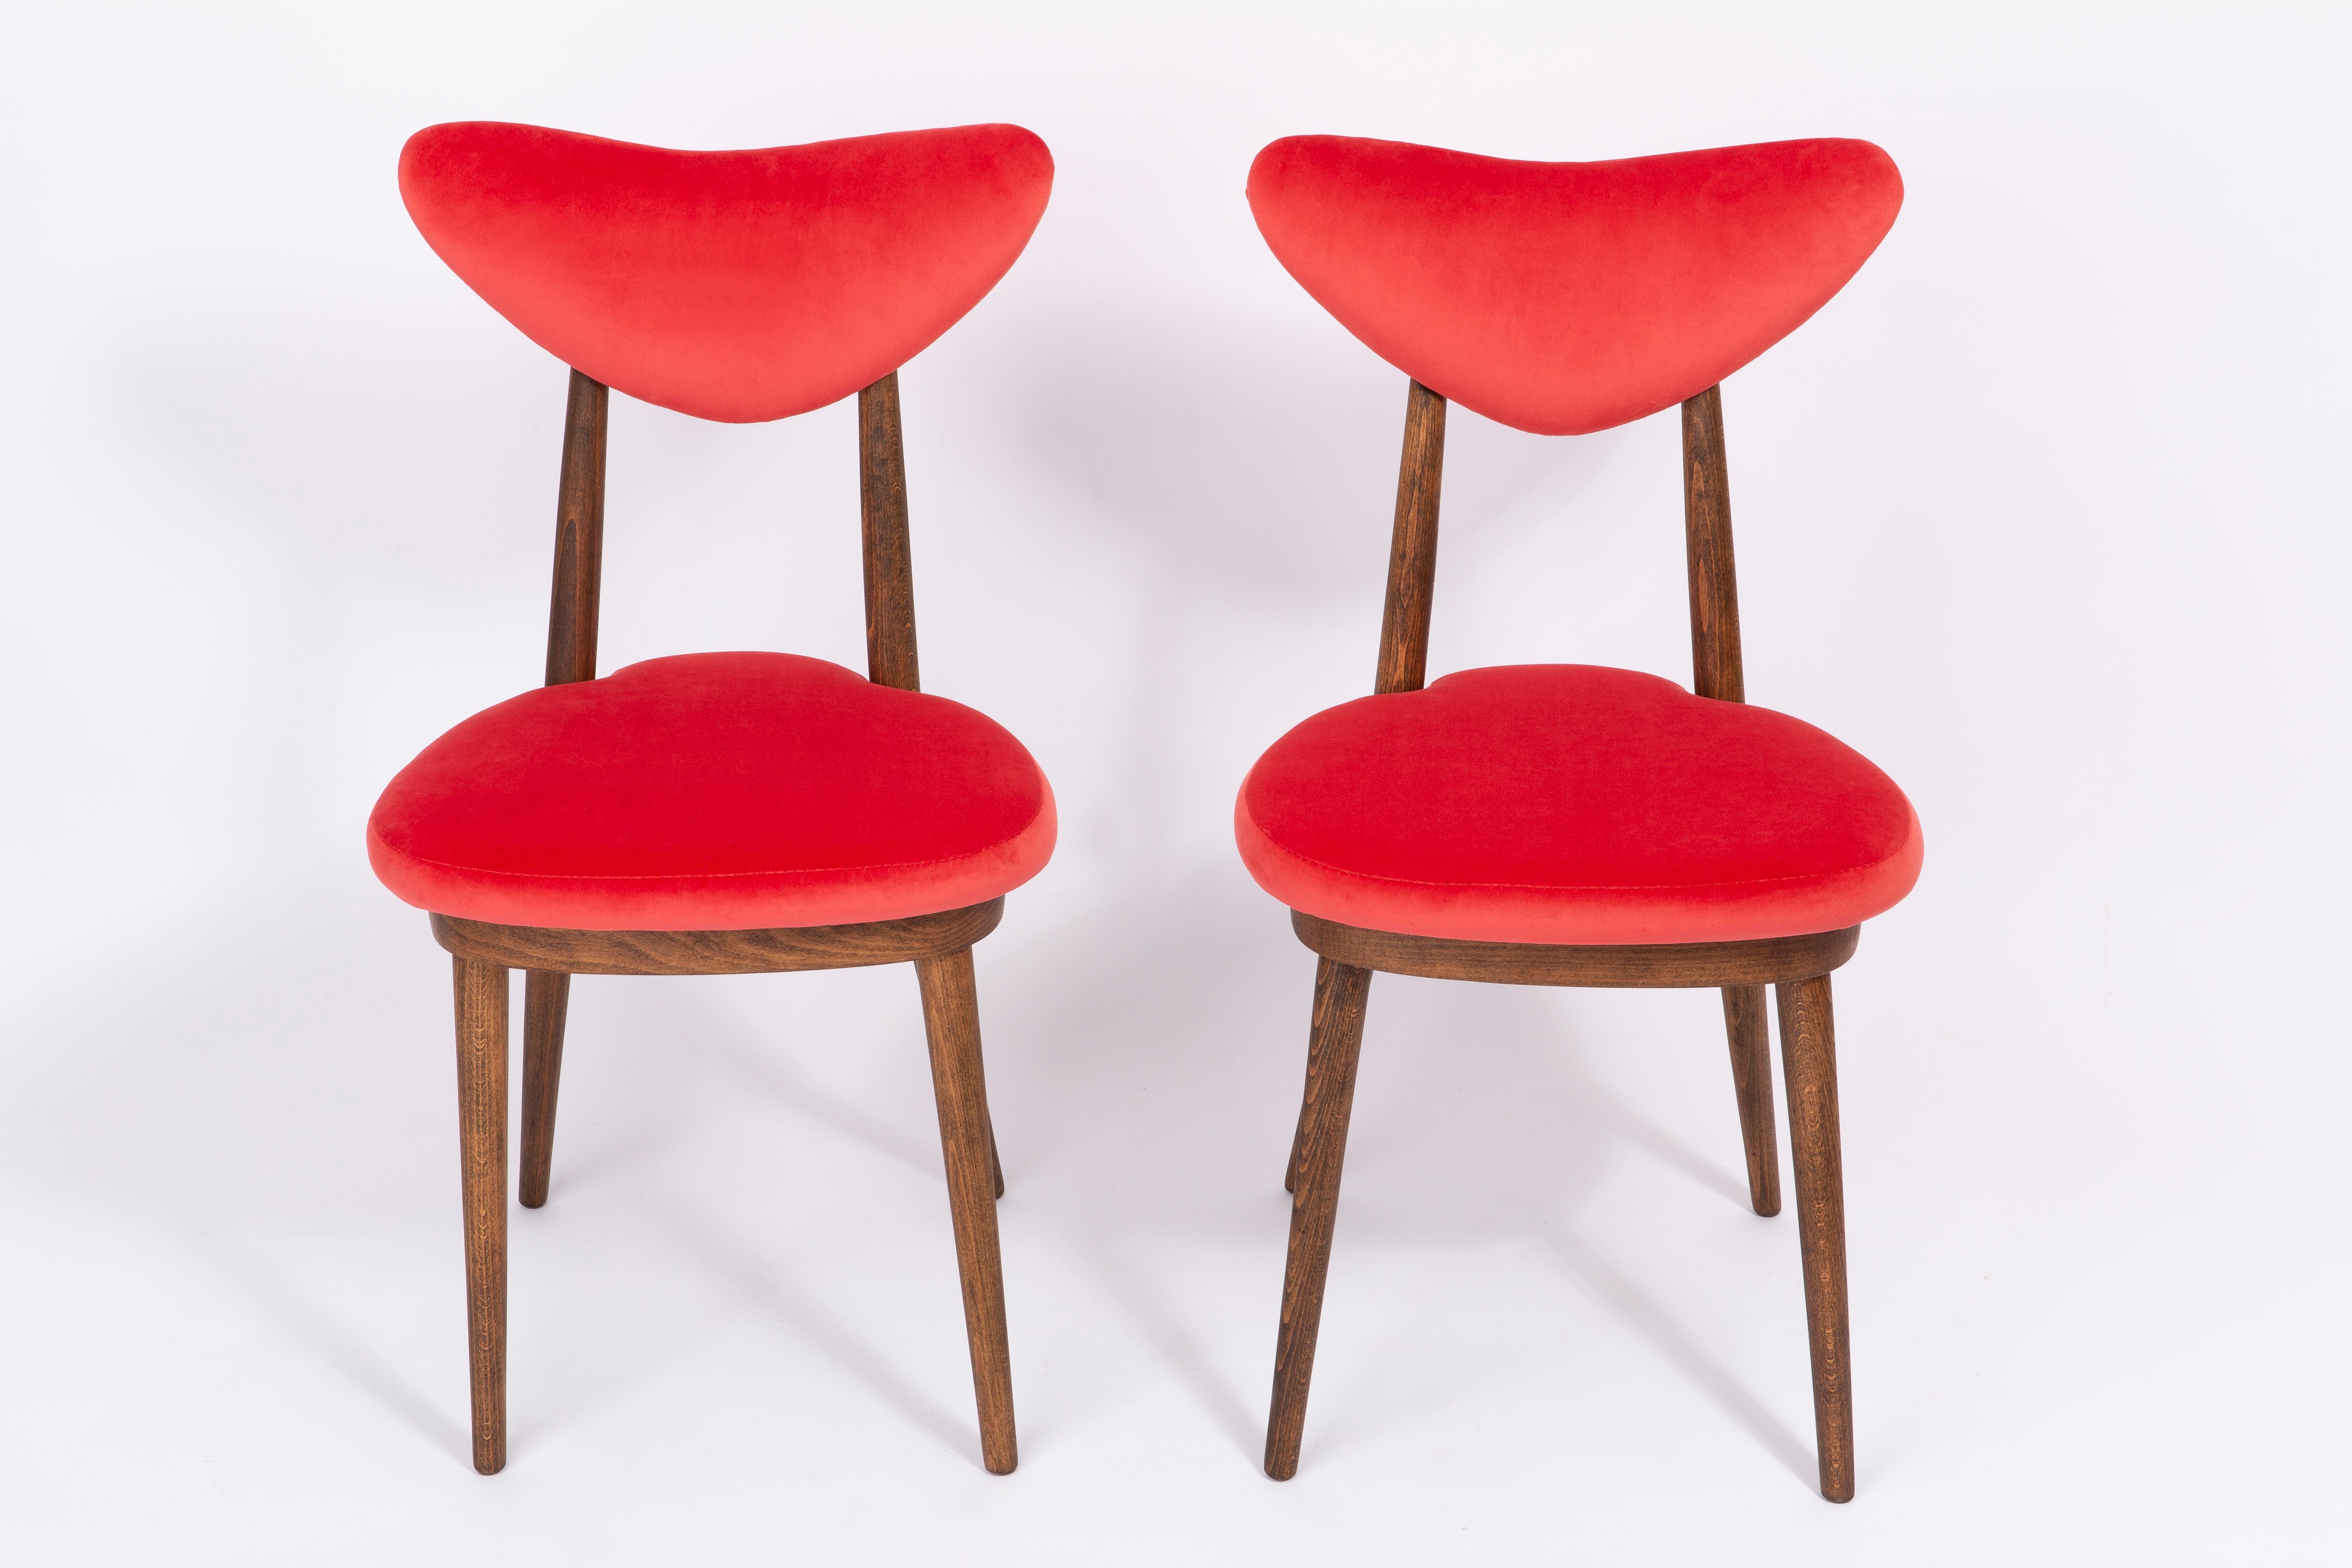 Polish Set of Four Red Heart Chairs, Poland, 1960s For Sale